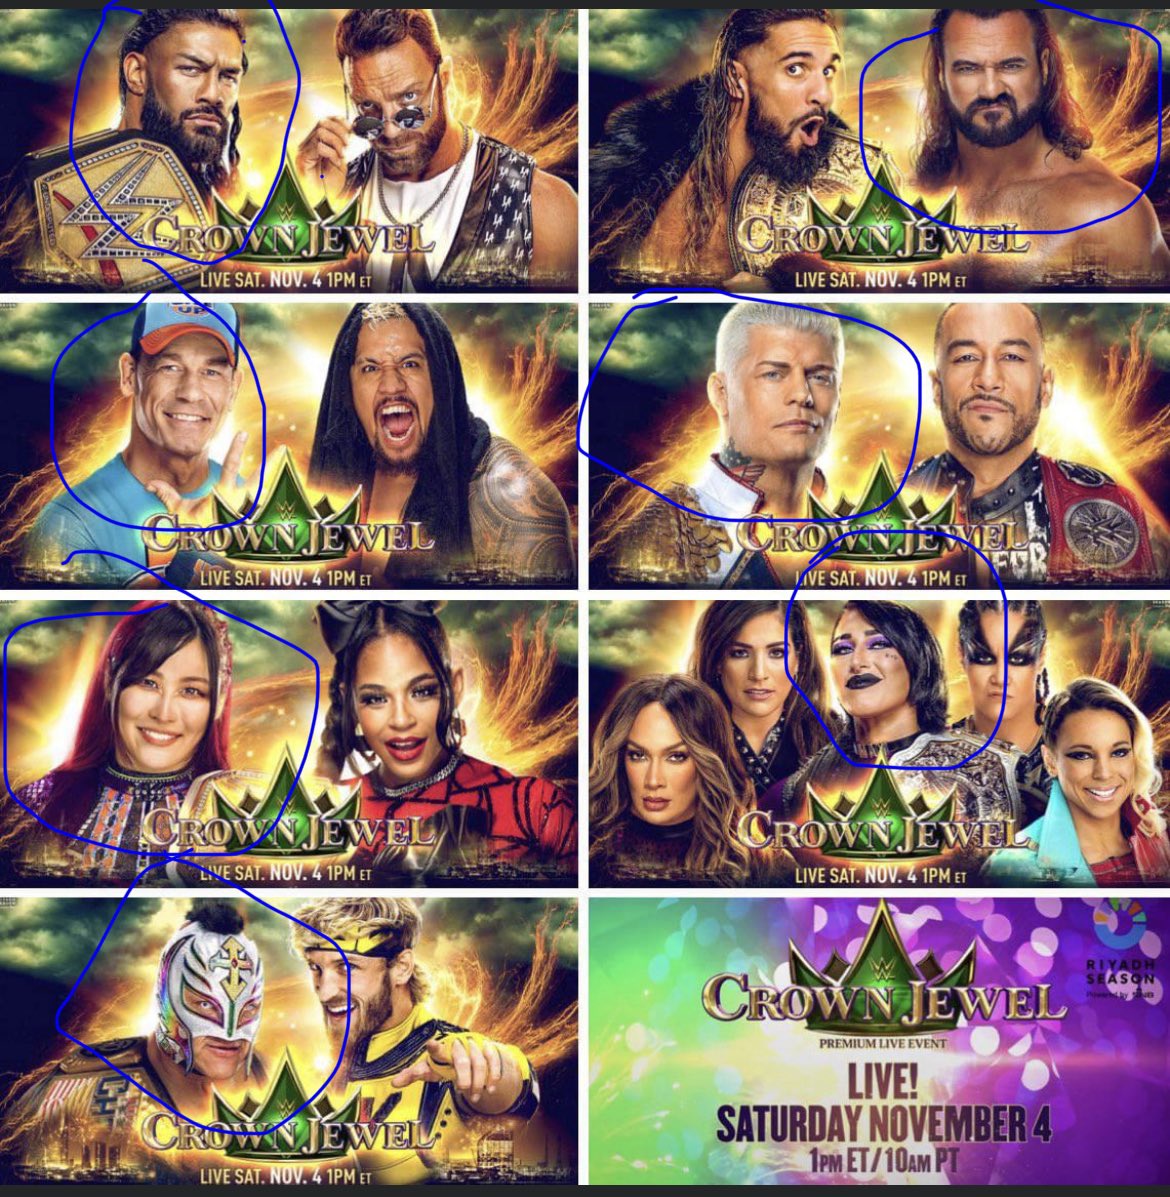 Predictions for crown jewel this Saturday. Any thoughts ?